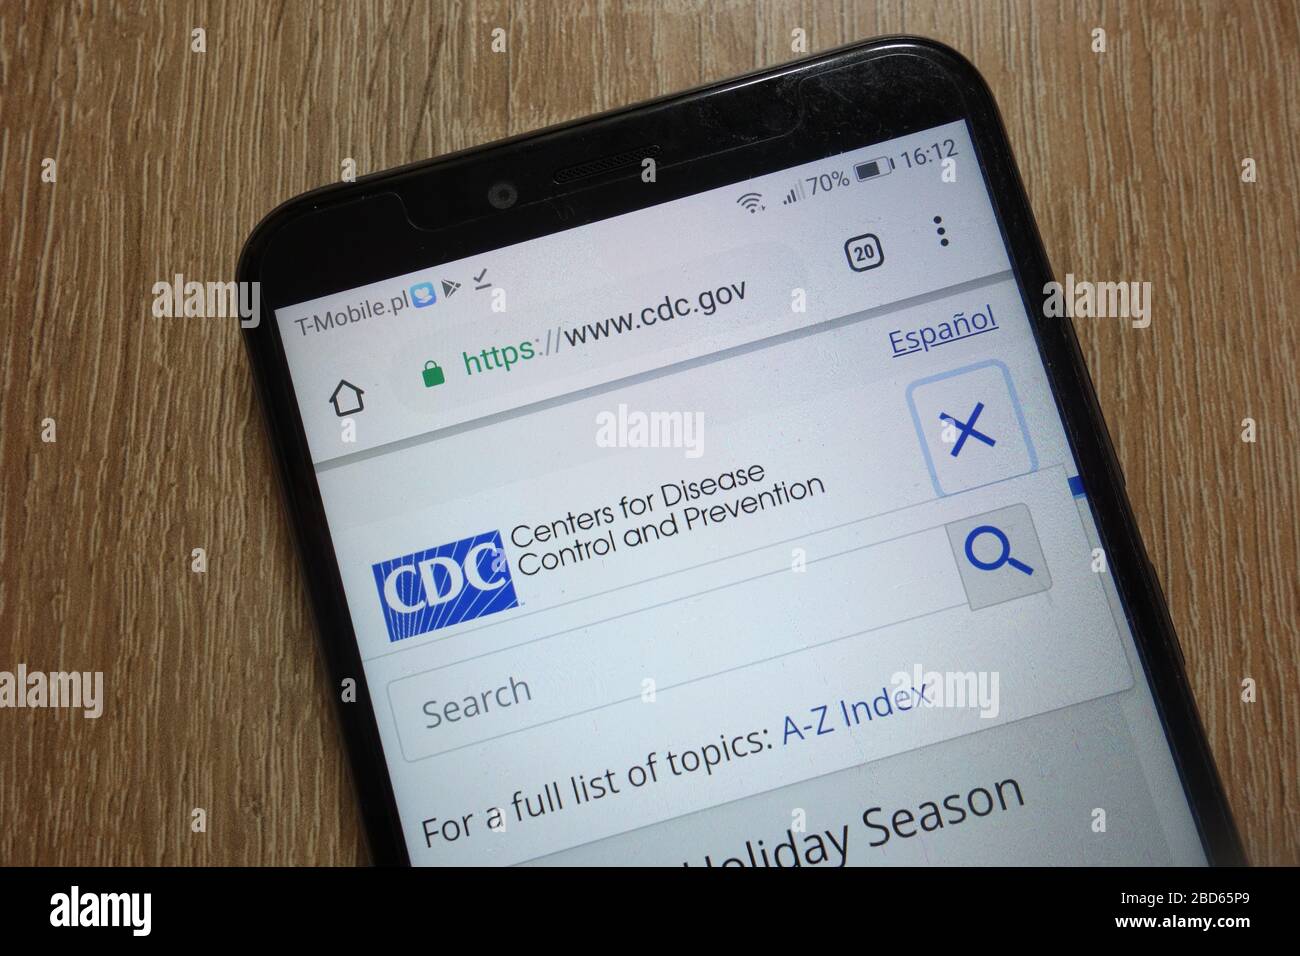 Center for Disease Control and Prevention (CDC) Website auf dem Smartphone angezeigt Stockfoto